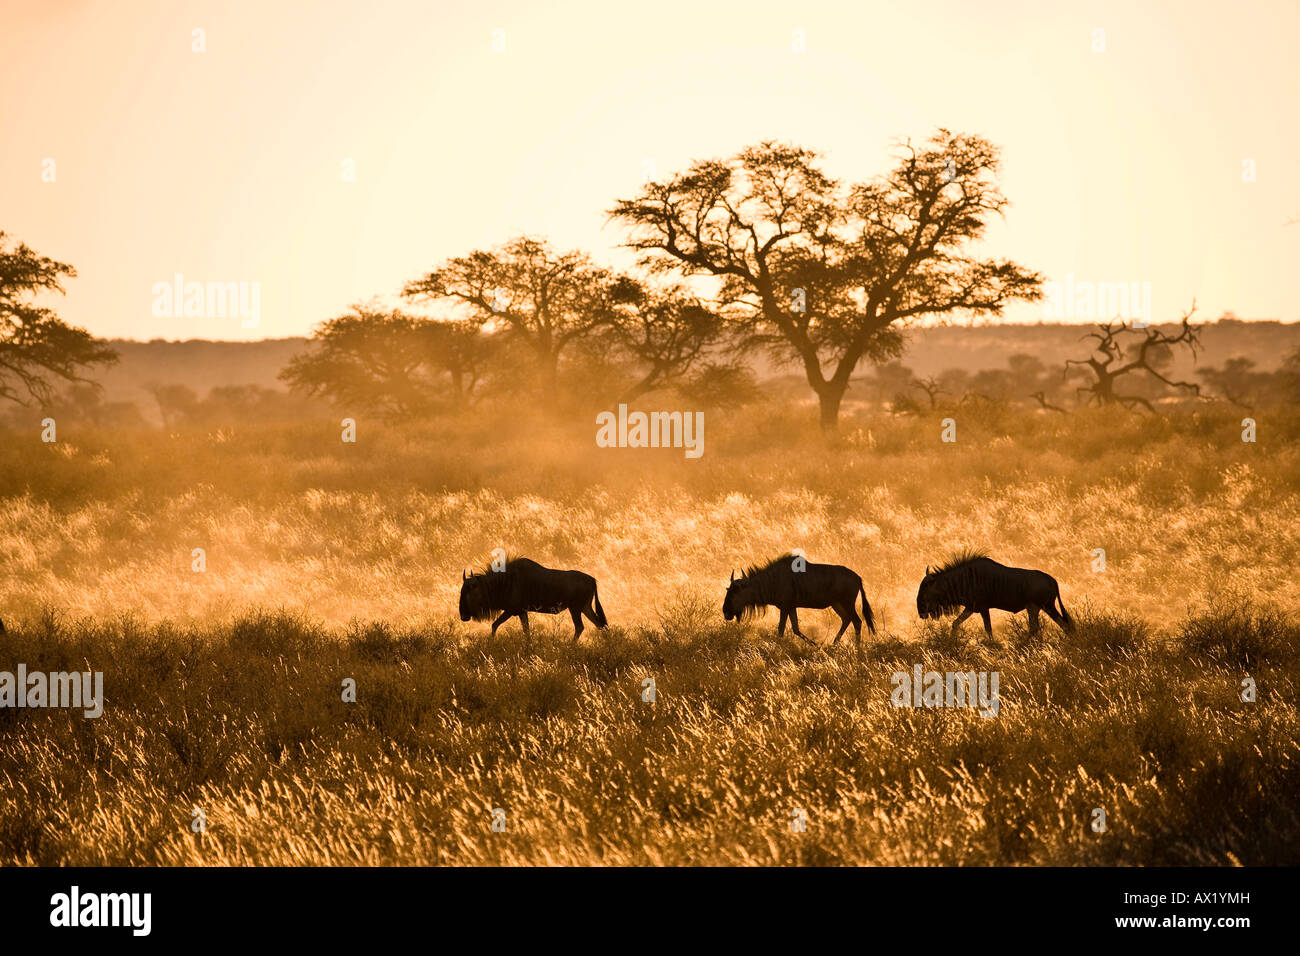 Herd of Wildebeests (Connochaetes) at sunset, South Africa, Africa Stock Photo